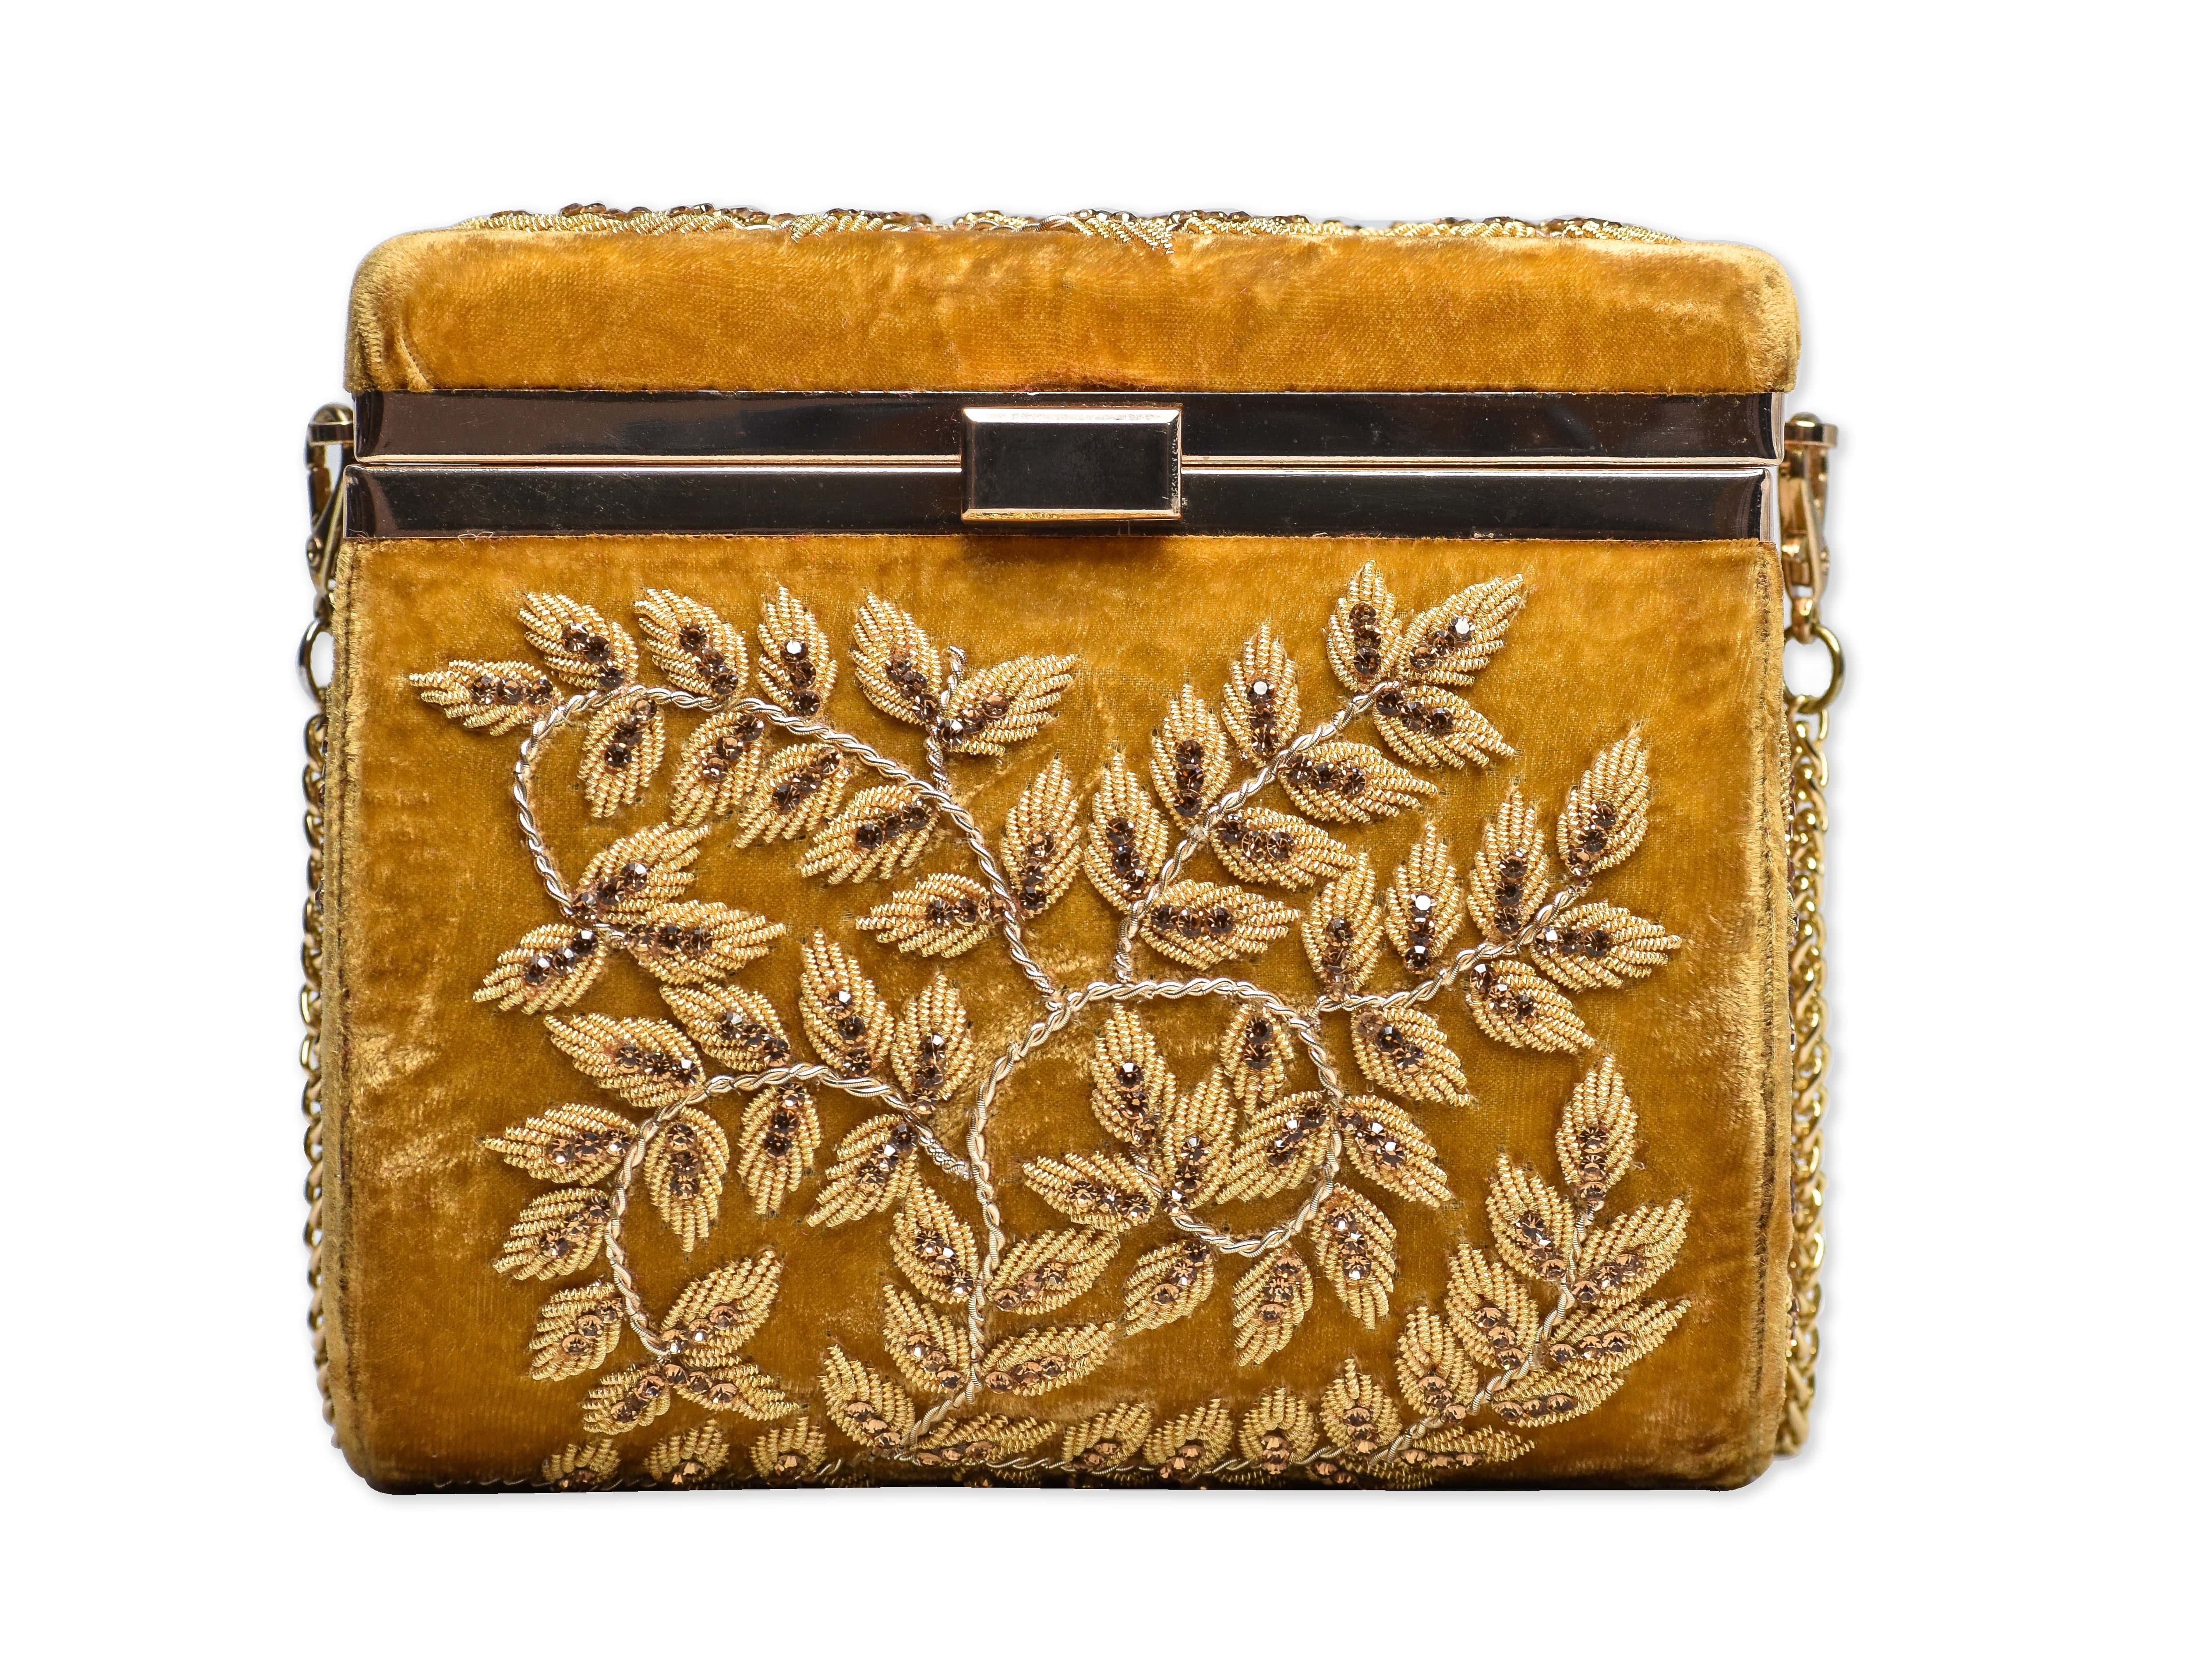 Womens Purses & Clutches | Buy affordable quality purses for women